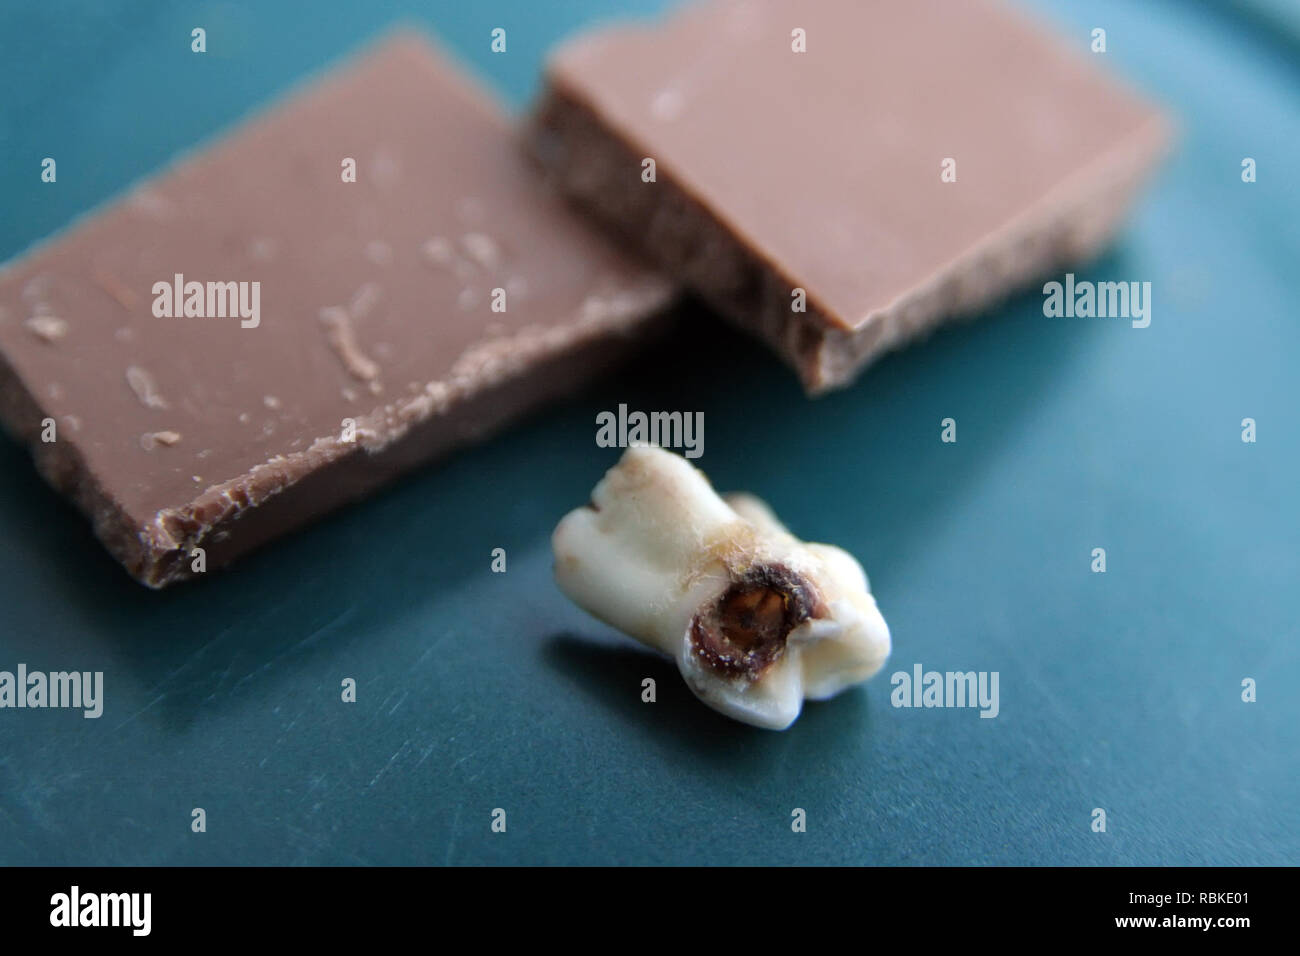 Bad tooth and piece of chocolate. Rotten tooth and chocolate. Unhealthy food. Importance of dental hygiene. Stock Photo